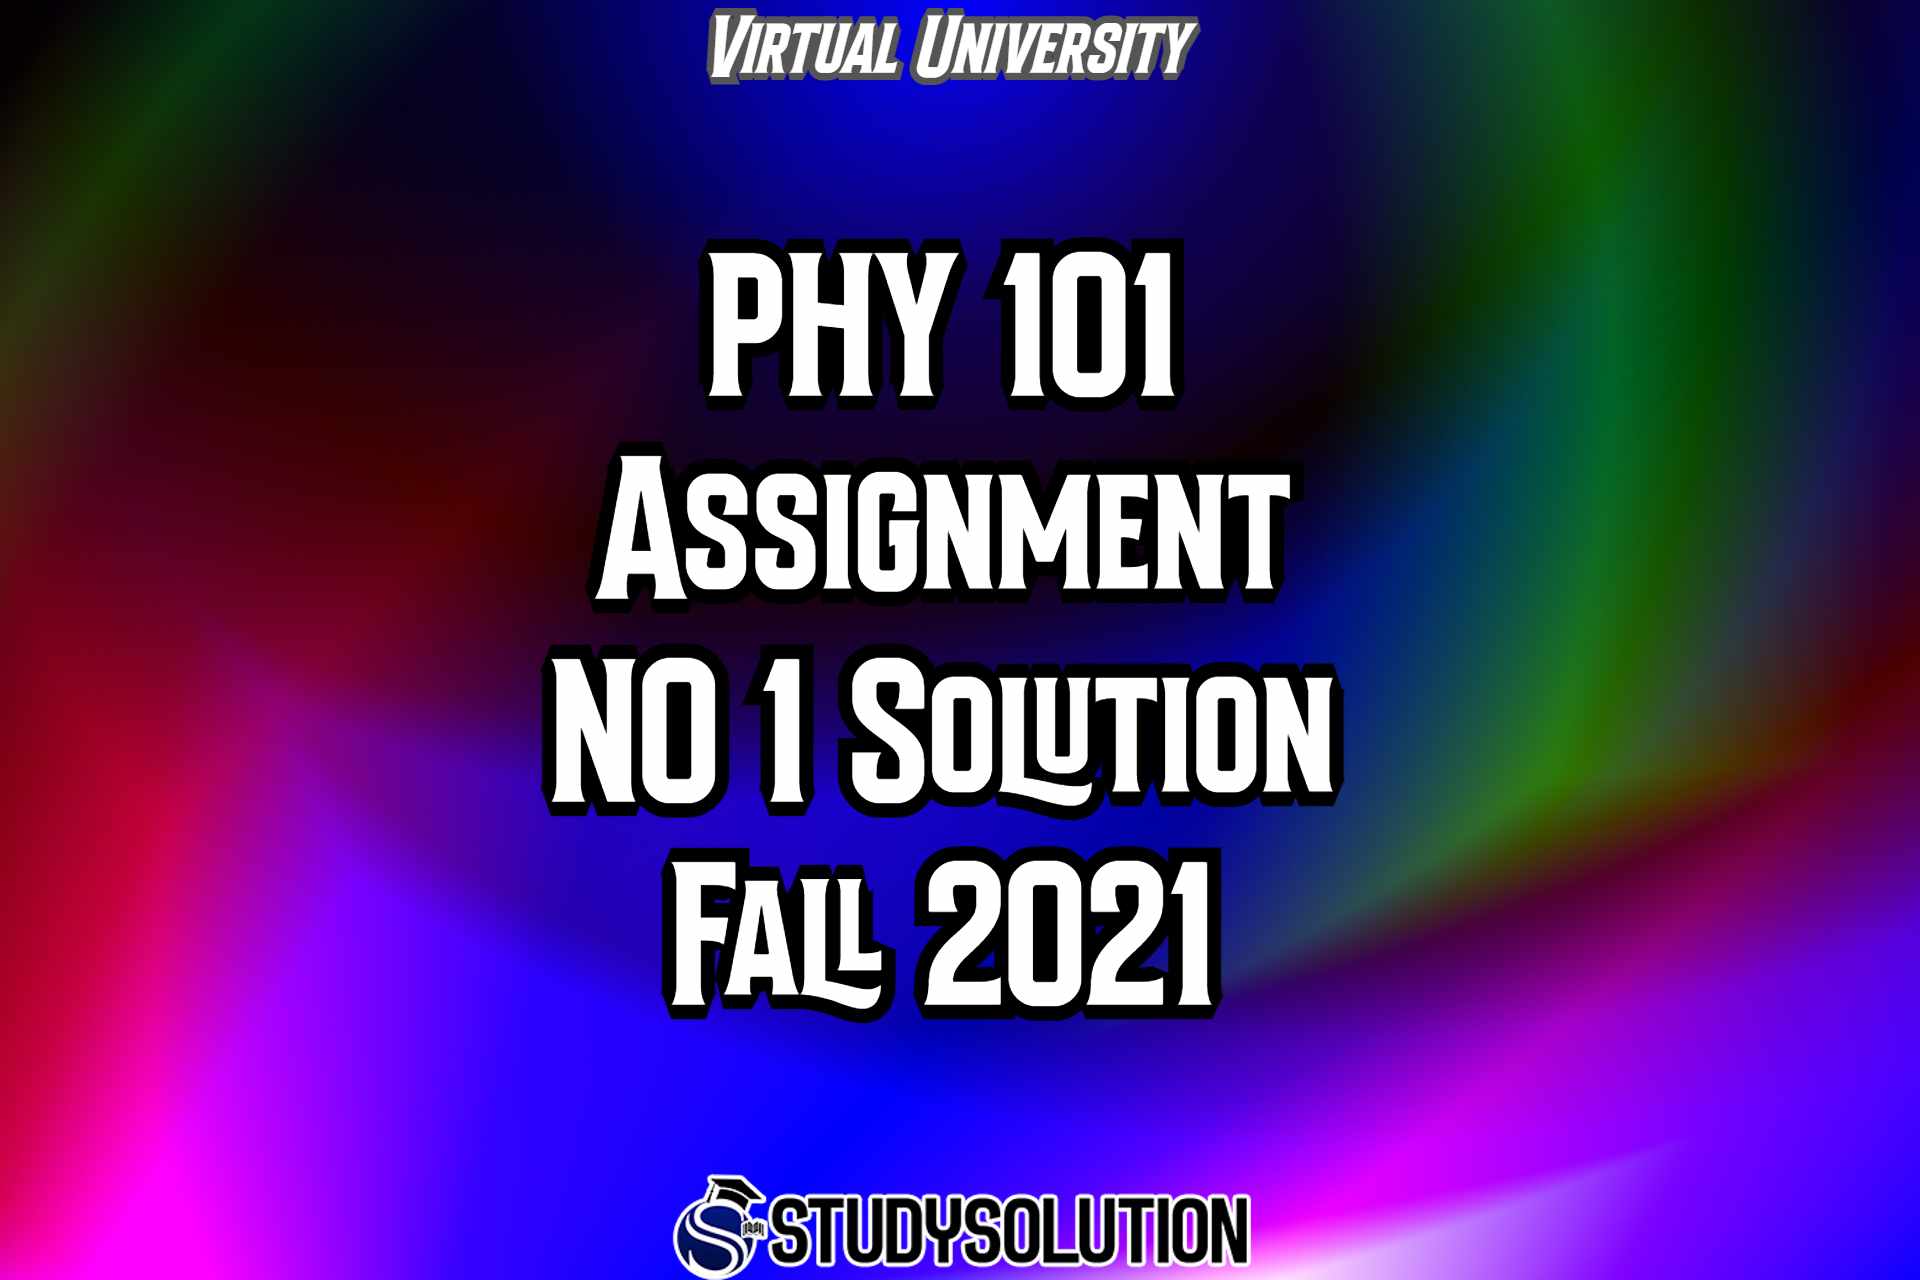 PHY101 Assignment NO 1 Solution Fall 2021